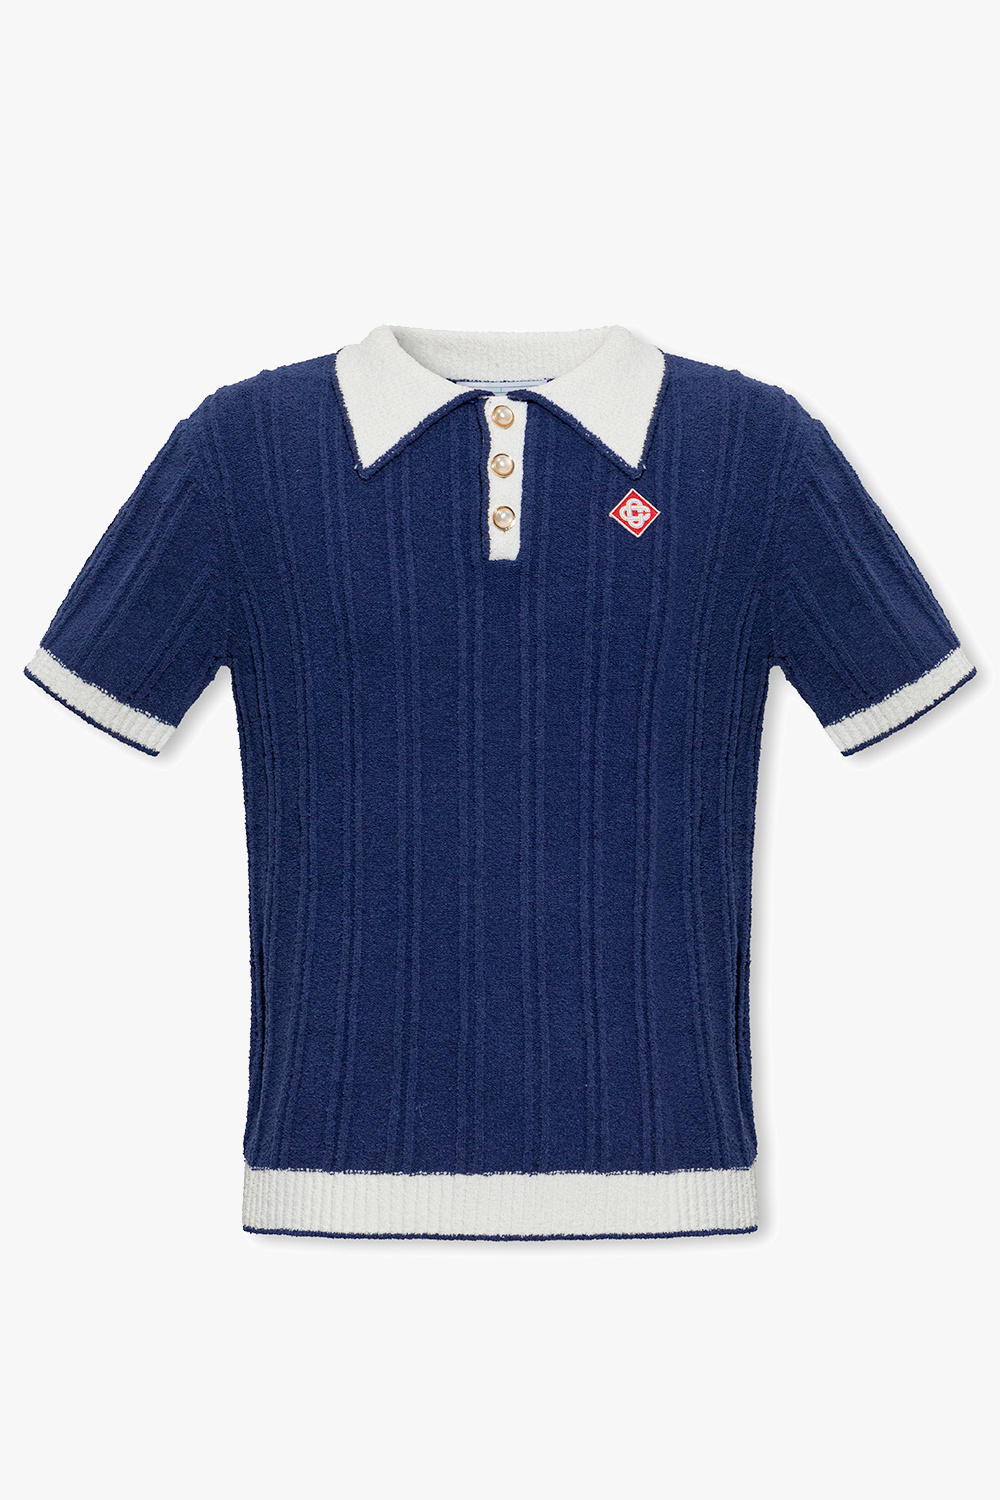 Casablanca VIVIENNE WESTWOOD polo homme SHIRT WITH LOGO